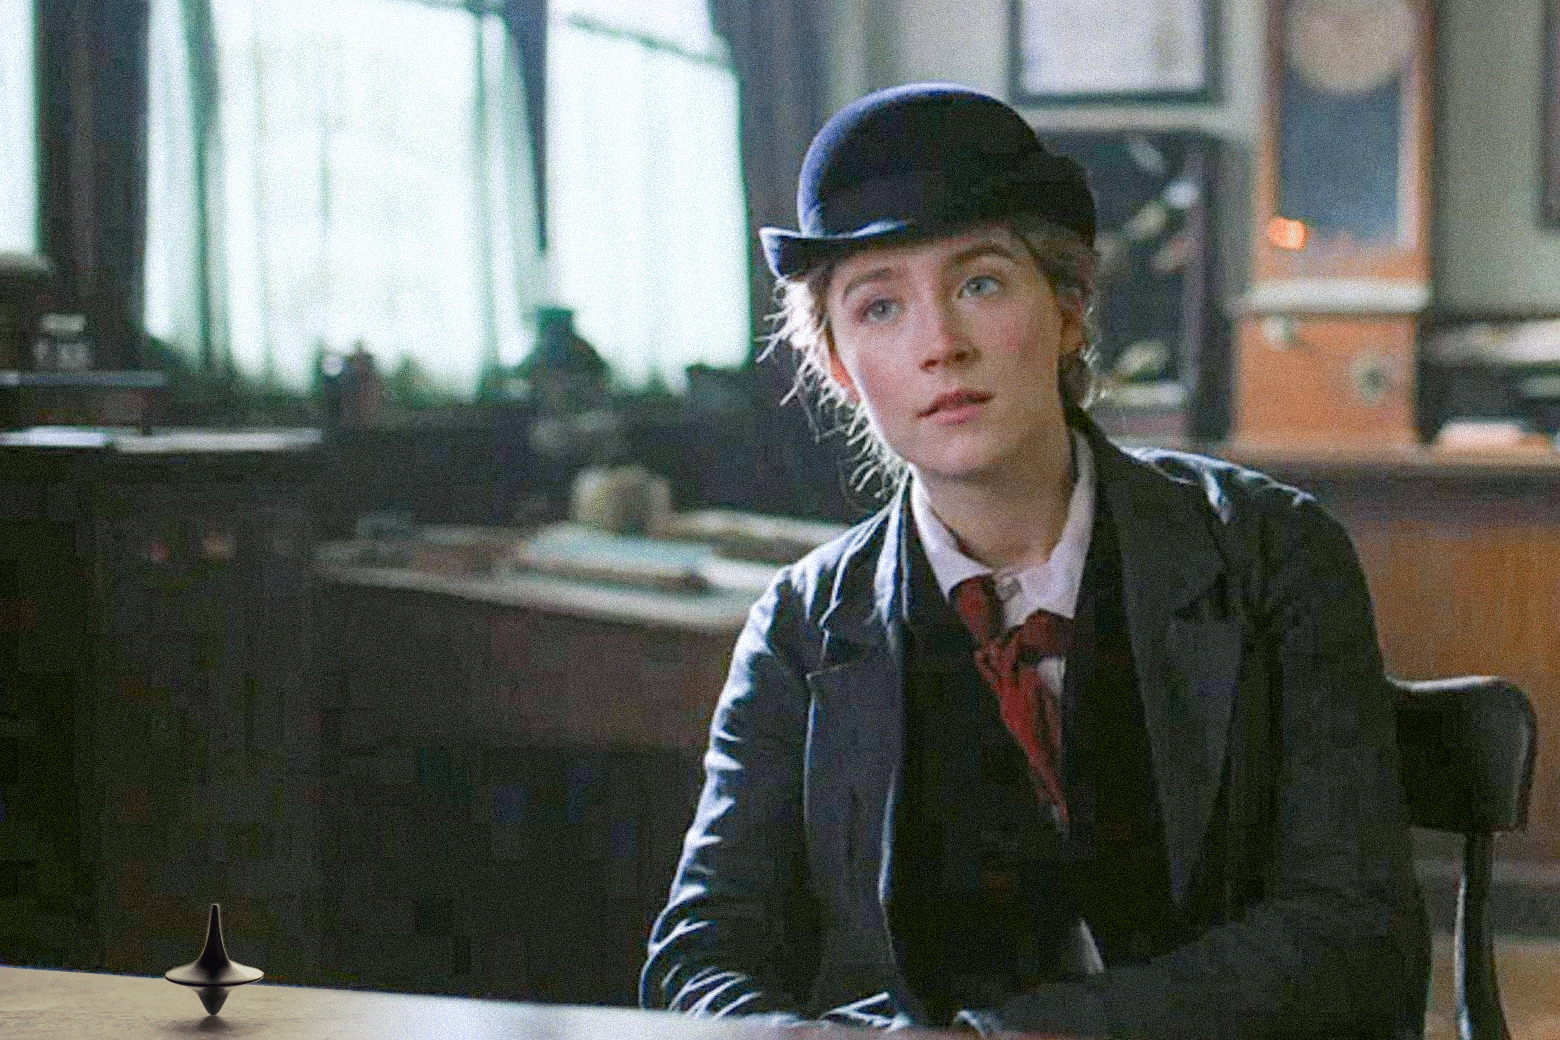 GIF of Saoirse Ronan as Jo while the Inception top spins endlessly on the table in front of her.